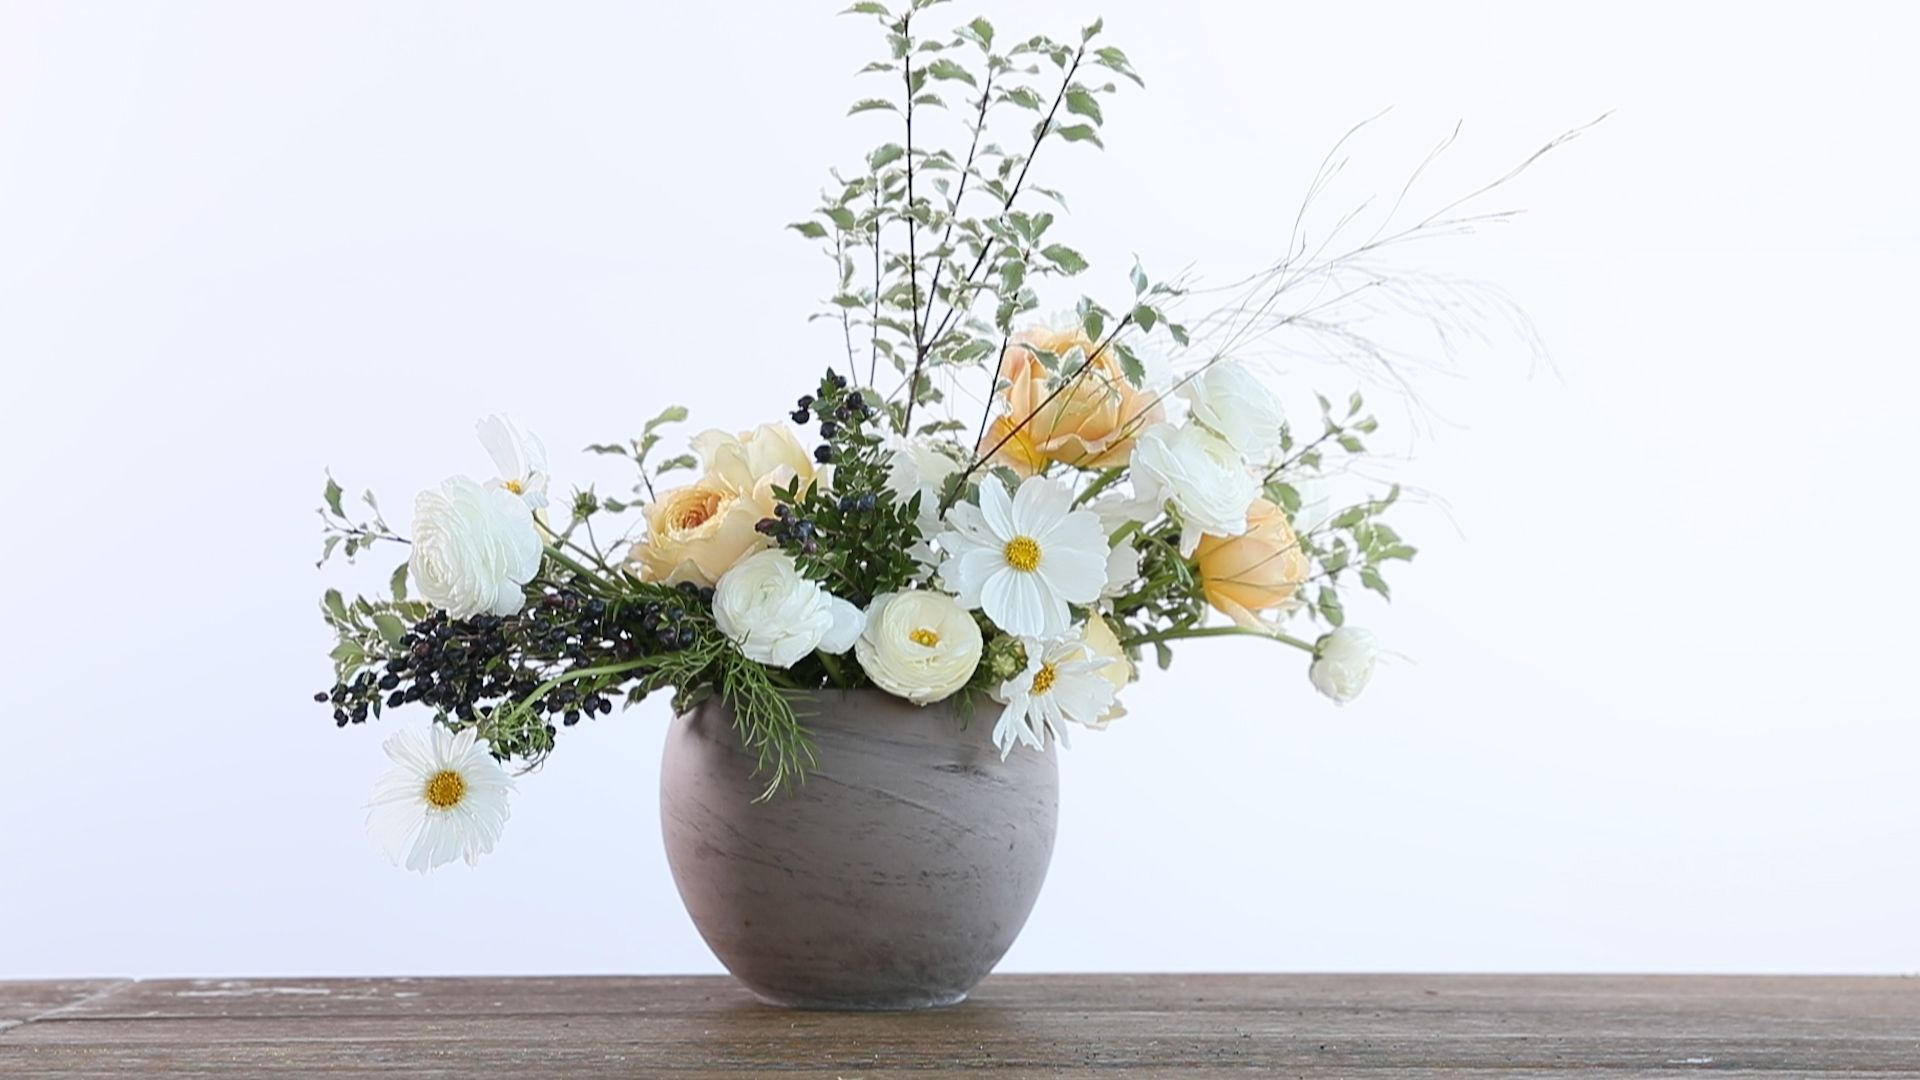 How To Arrange Flowers In A Wide Mouth Vase